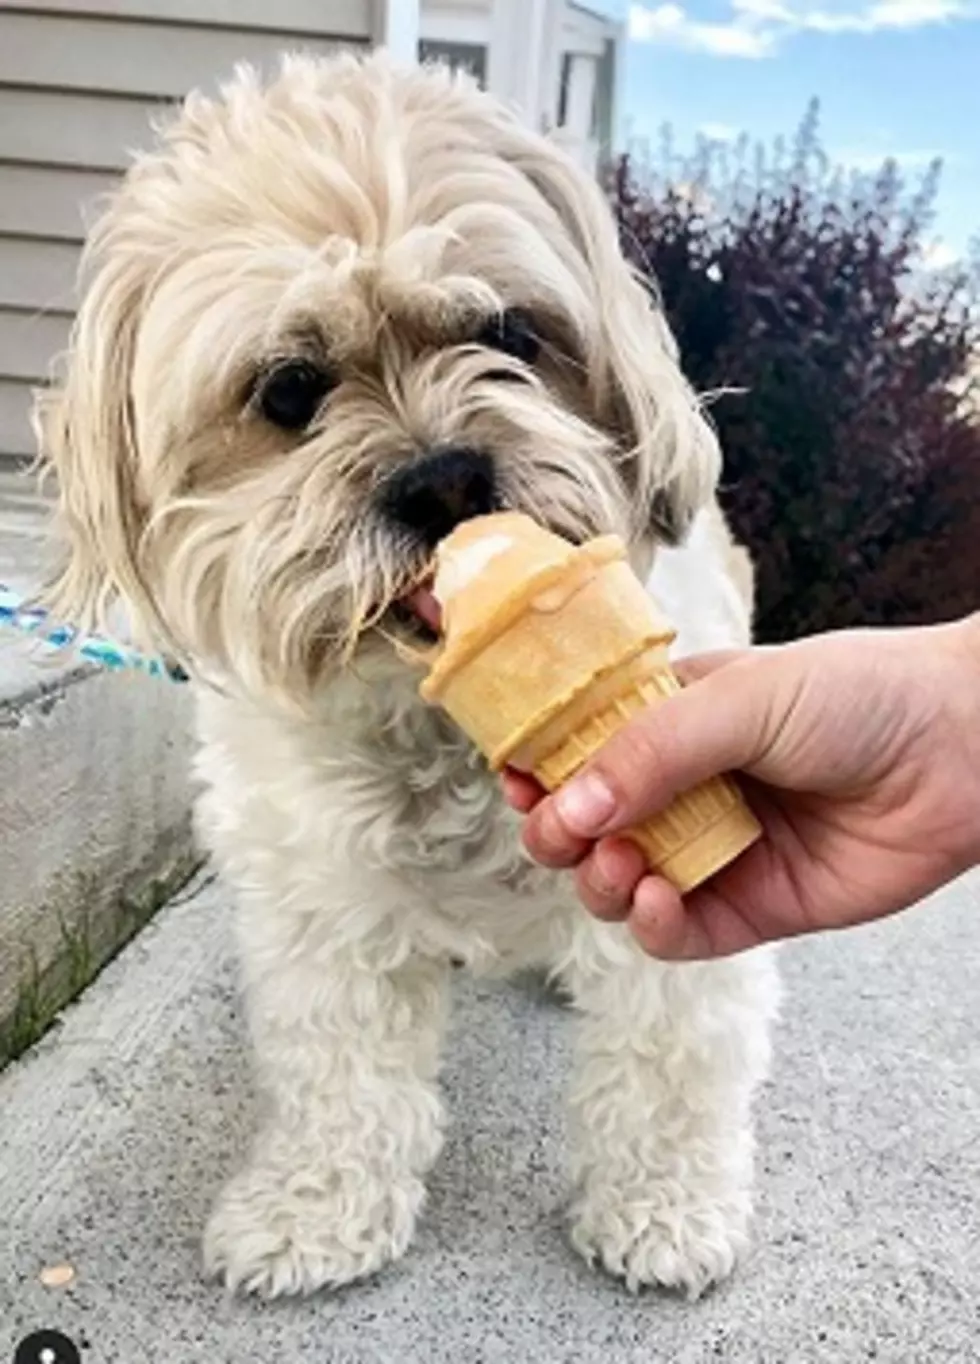 Get Ice Cream For Dogs At This Store